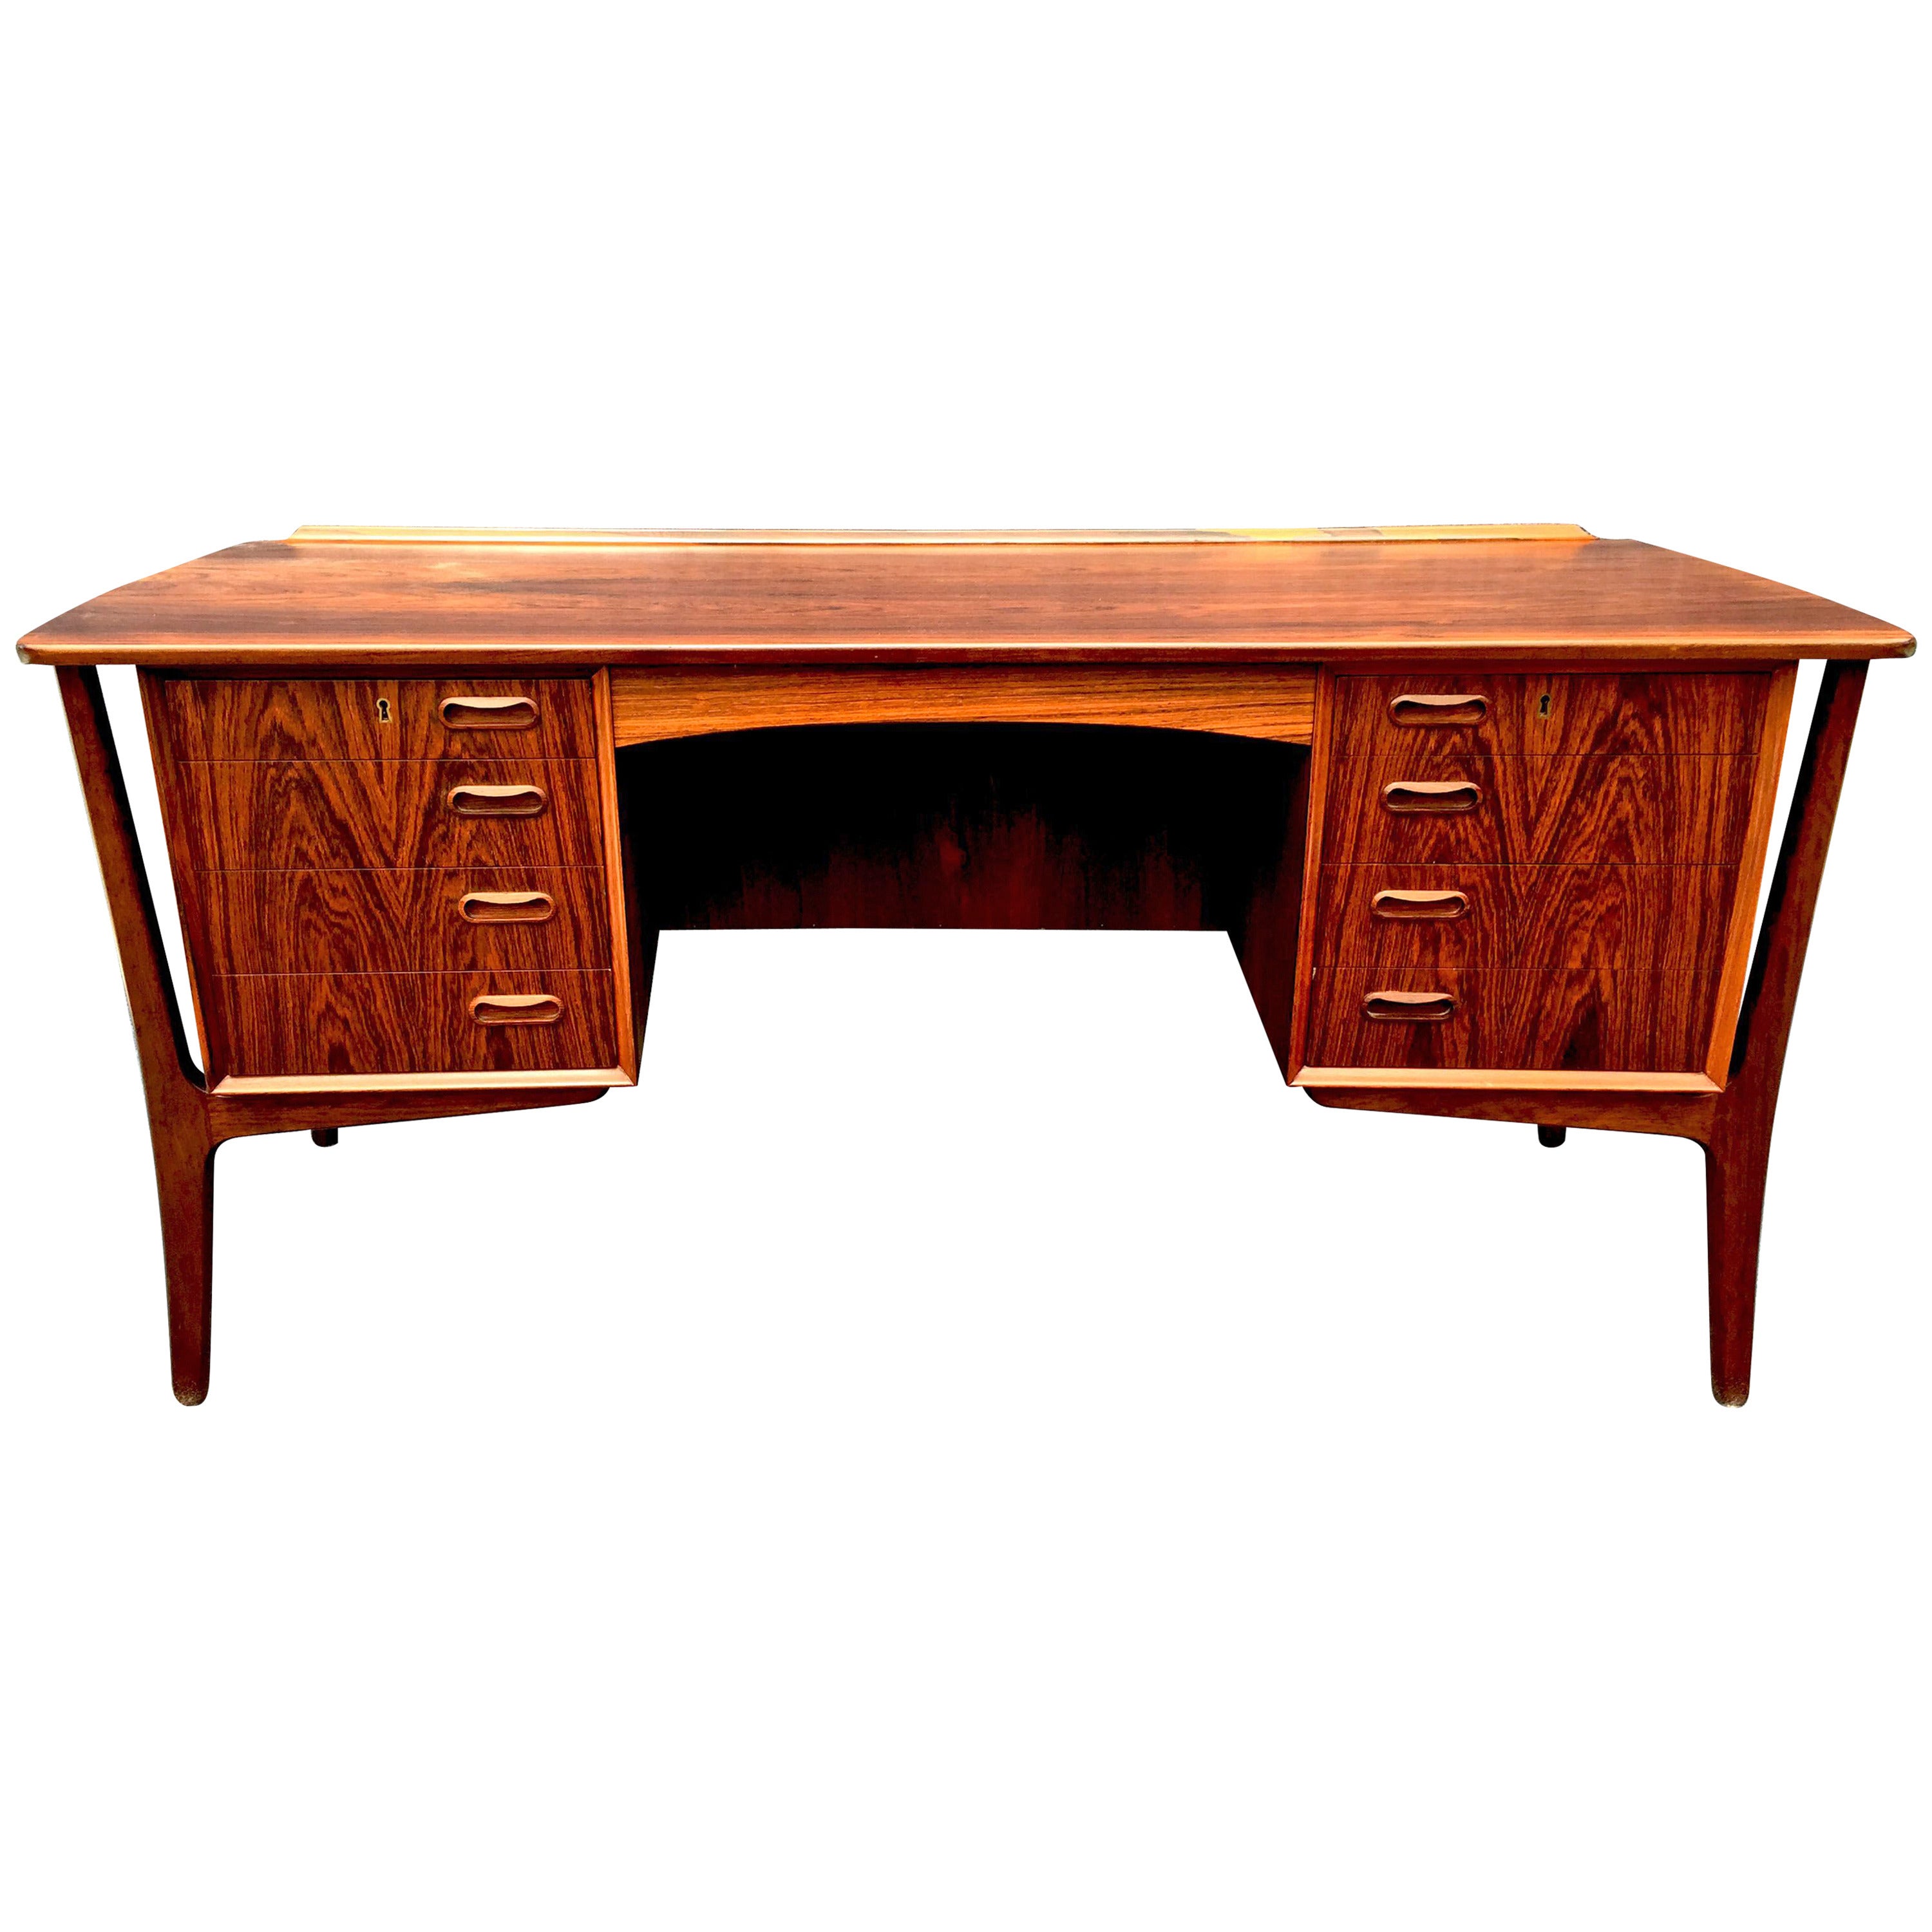 Curved Danish Rosewood Desk by Svend Aage Madsen